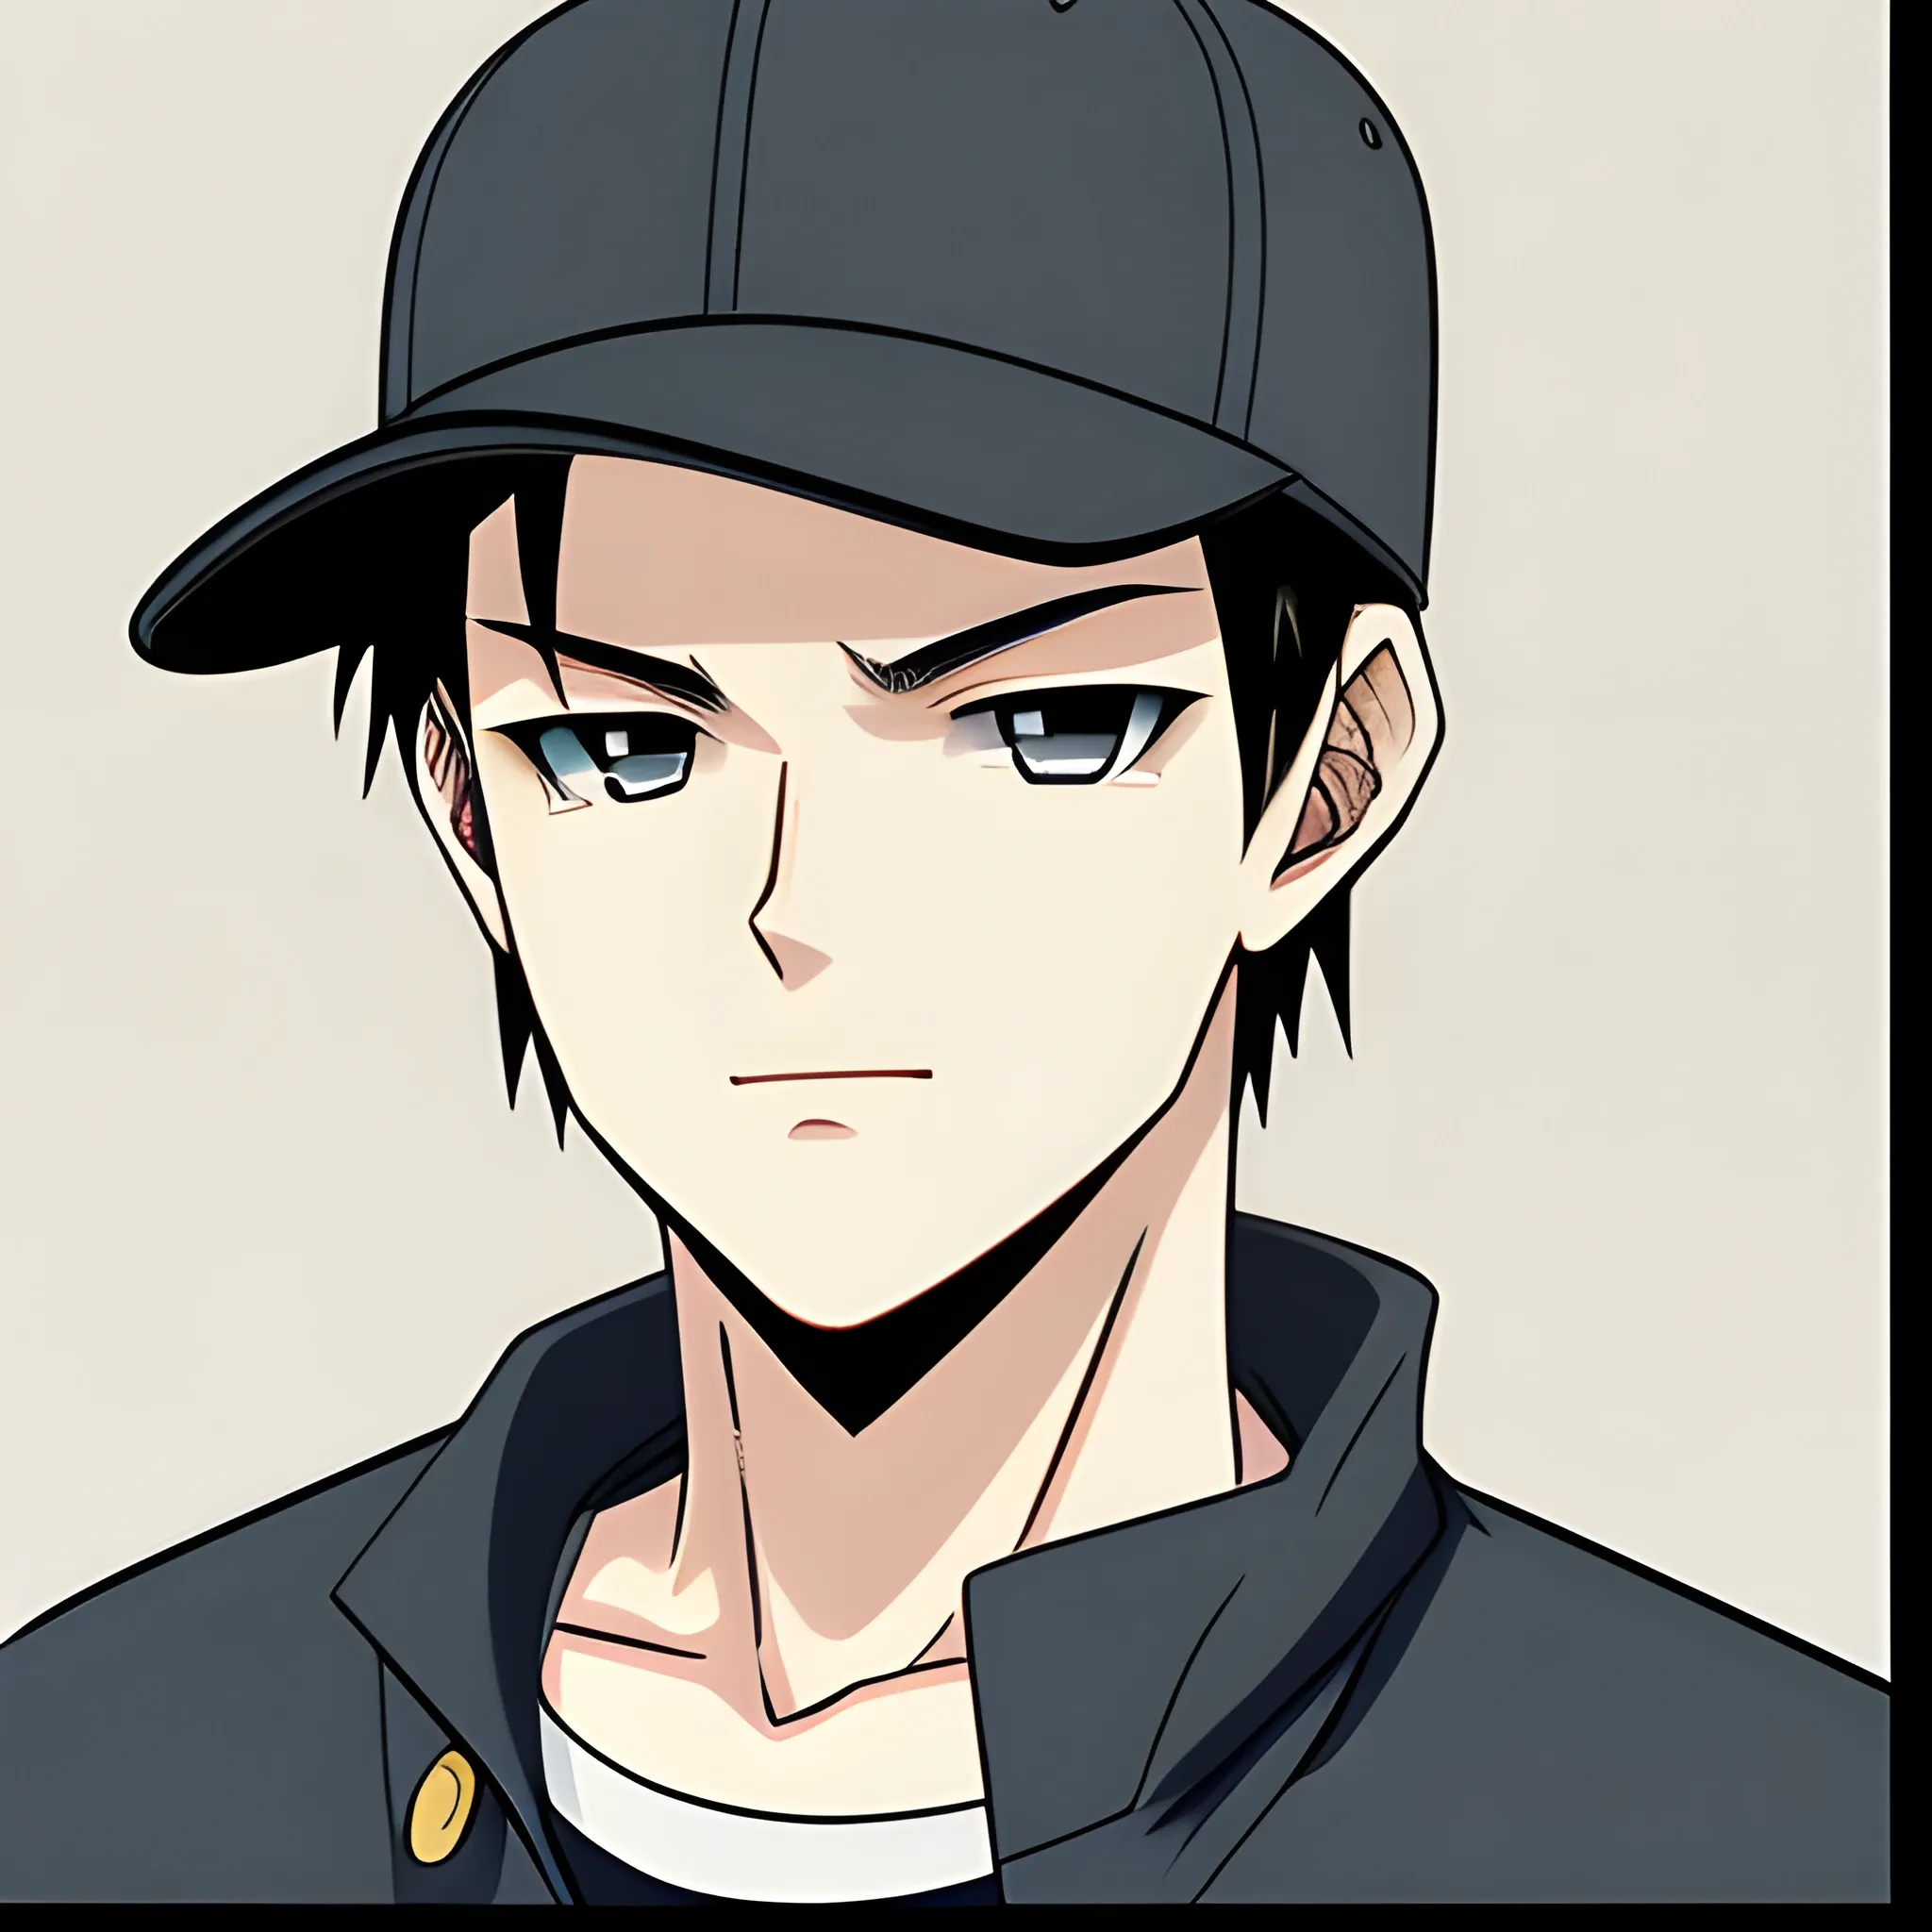 An image of a man wearing a cap in a manga art, anime style character style